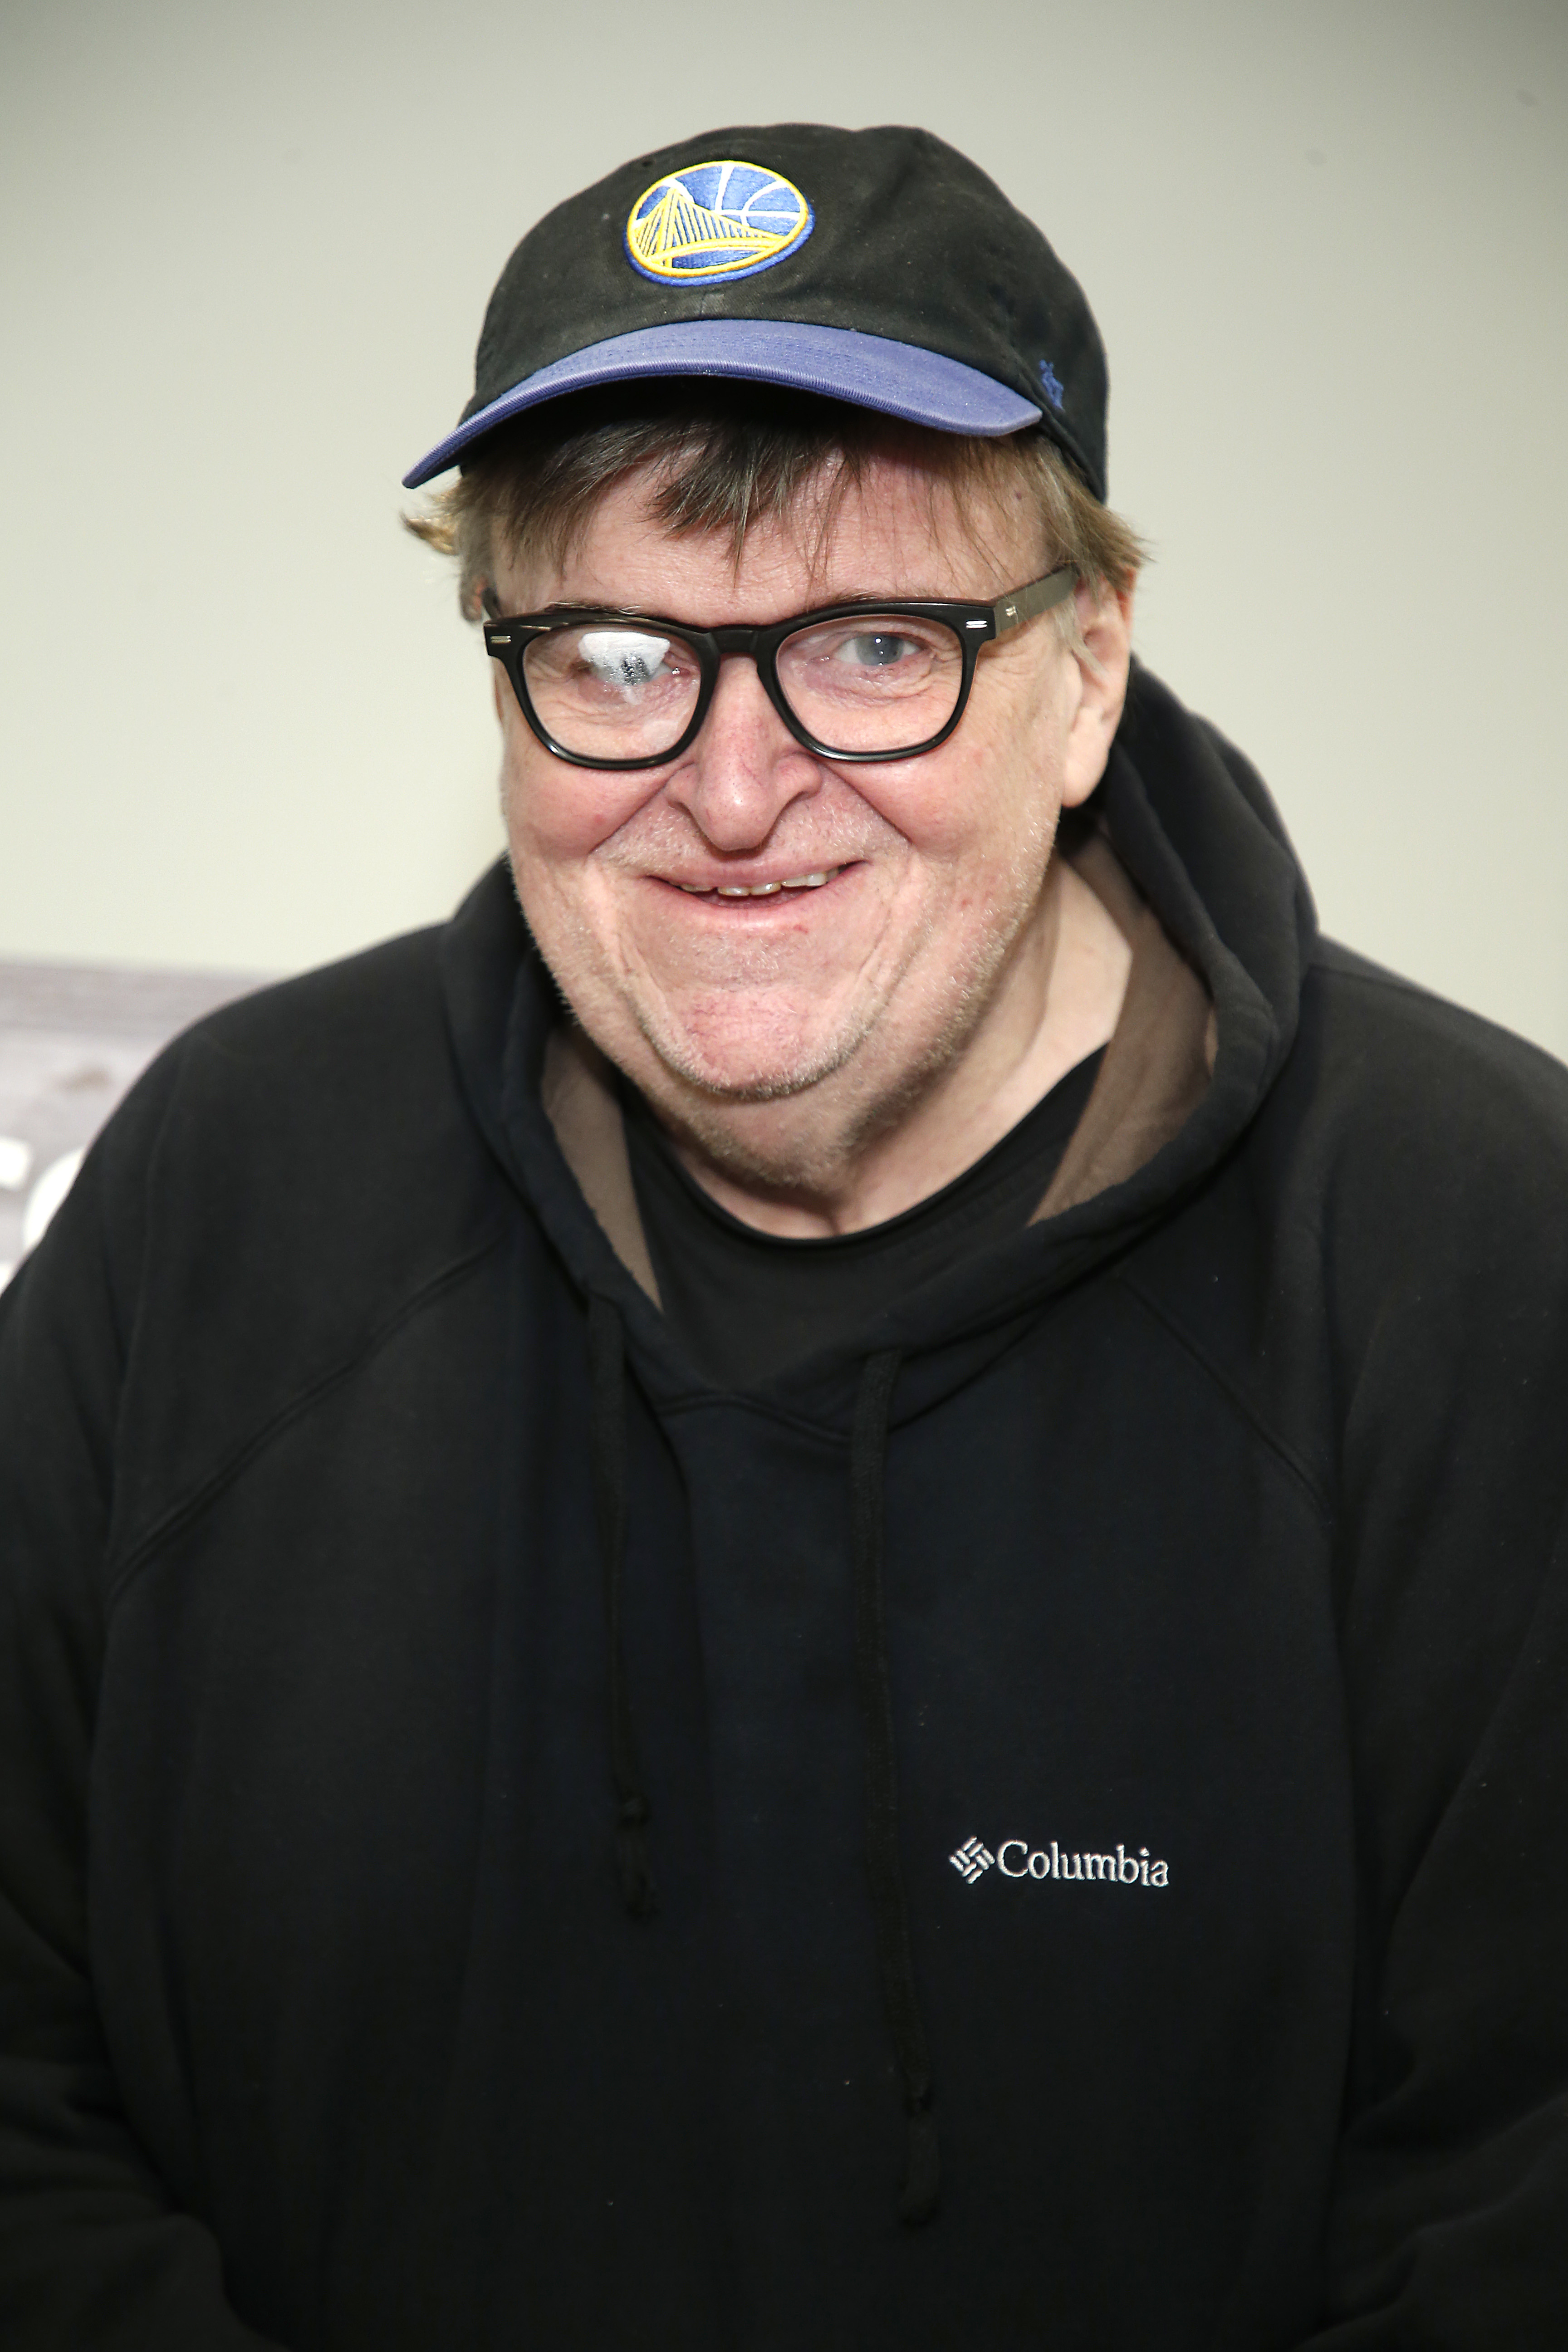 Michael Moore smiling, wearing a baseball cap and glasses, dressed casually in a black hoodie